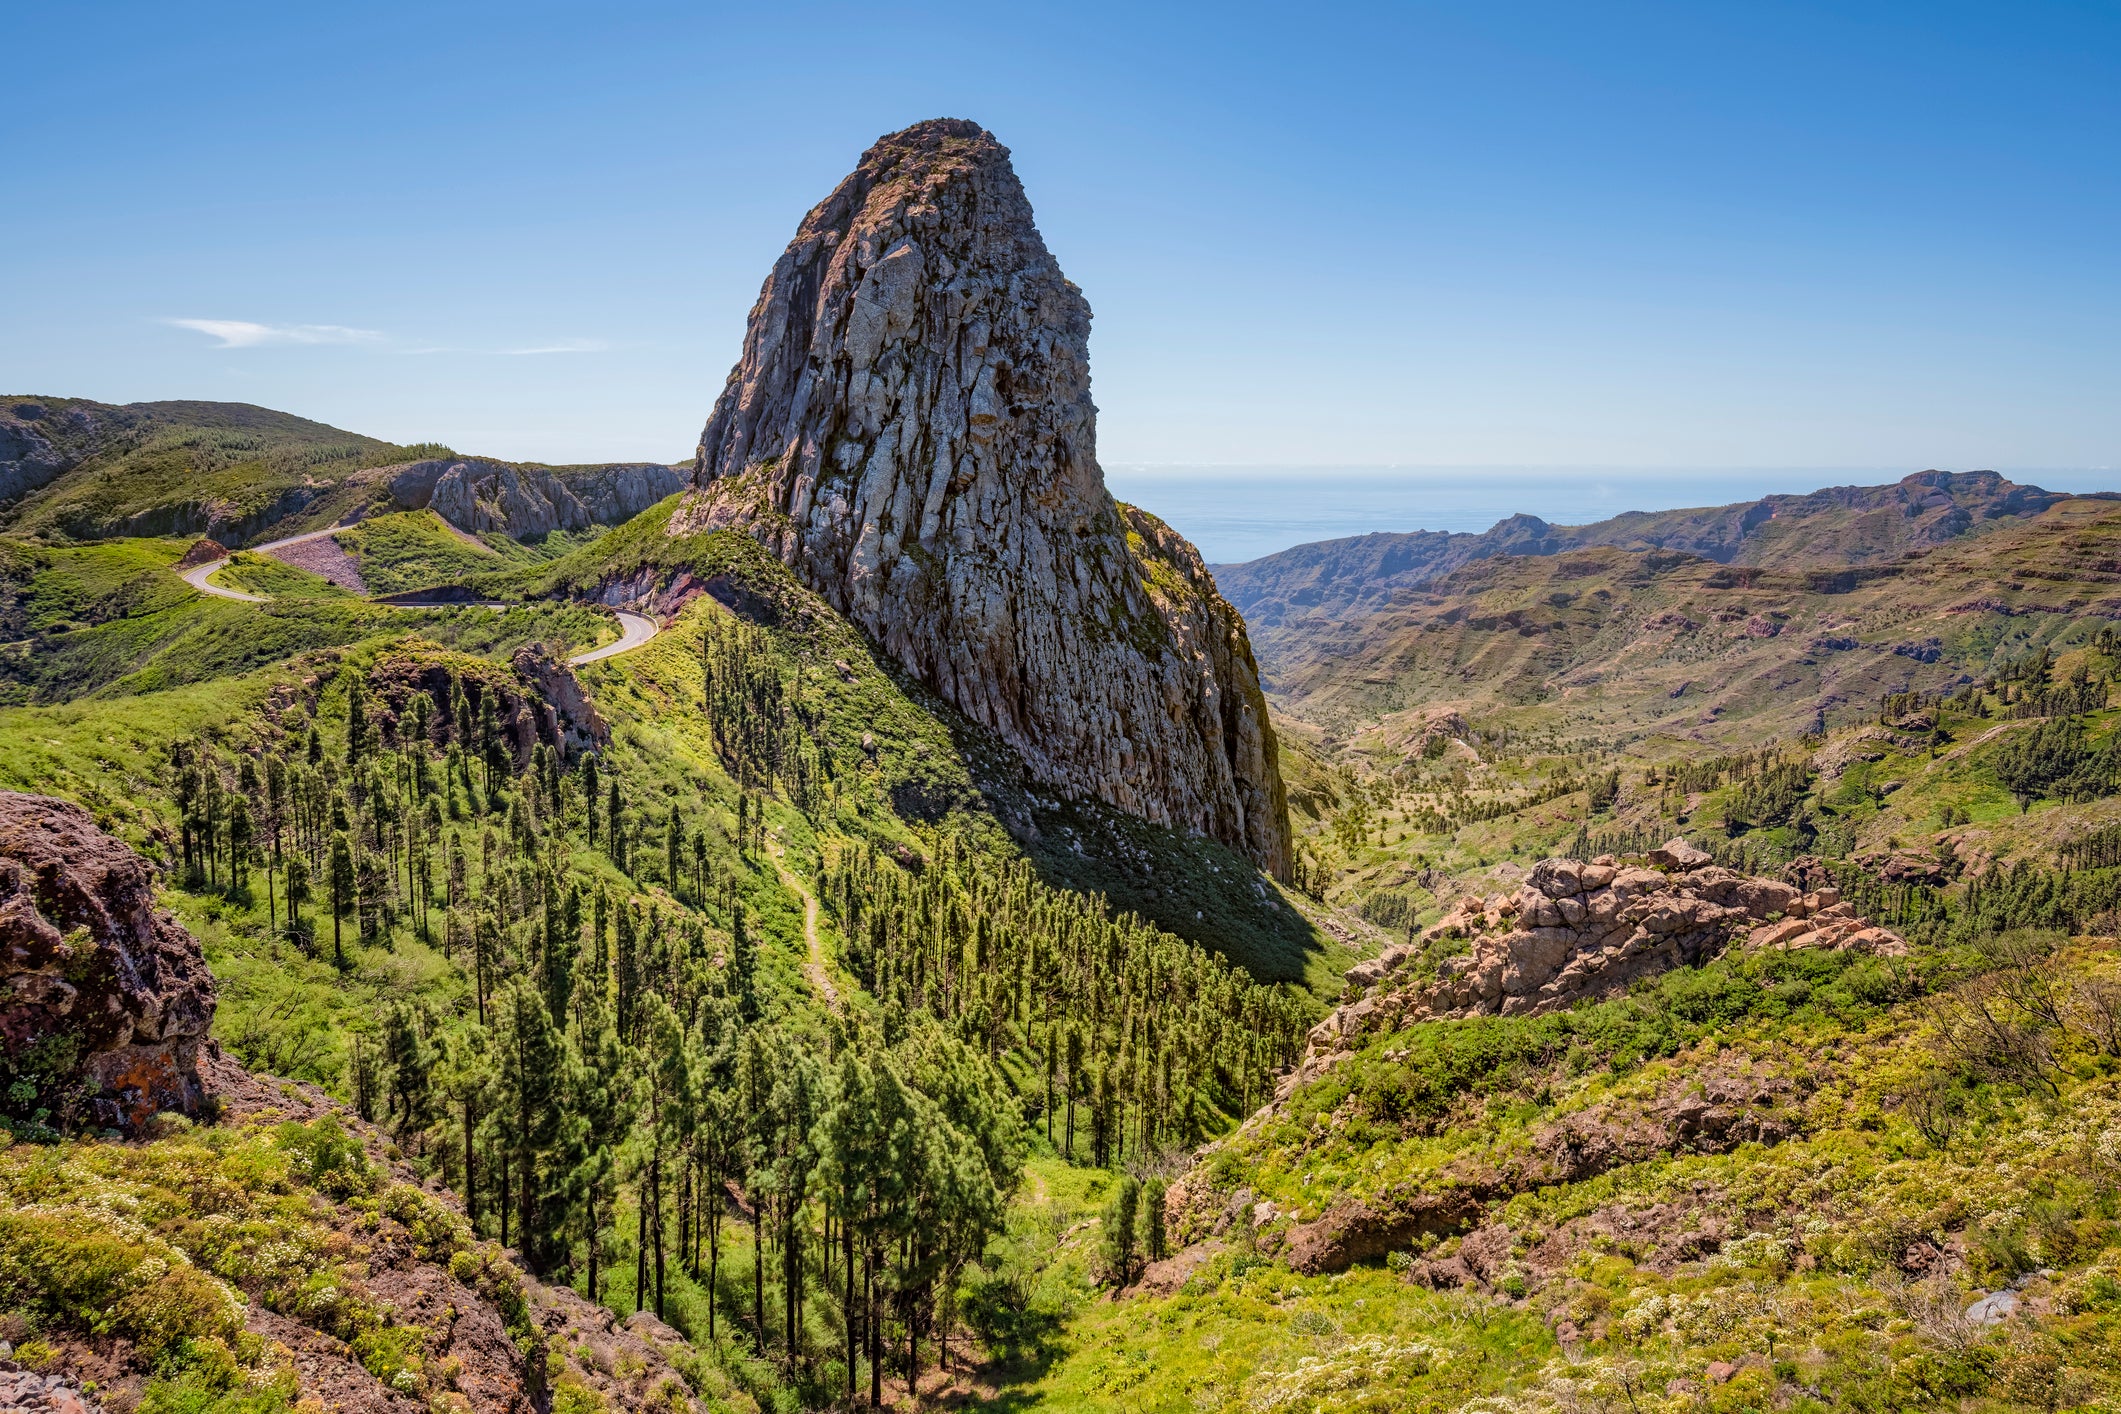 The second smallest of the Canaries, La Gomera is a hiker’s paradise of volcanic mountains and dense forest